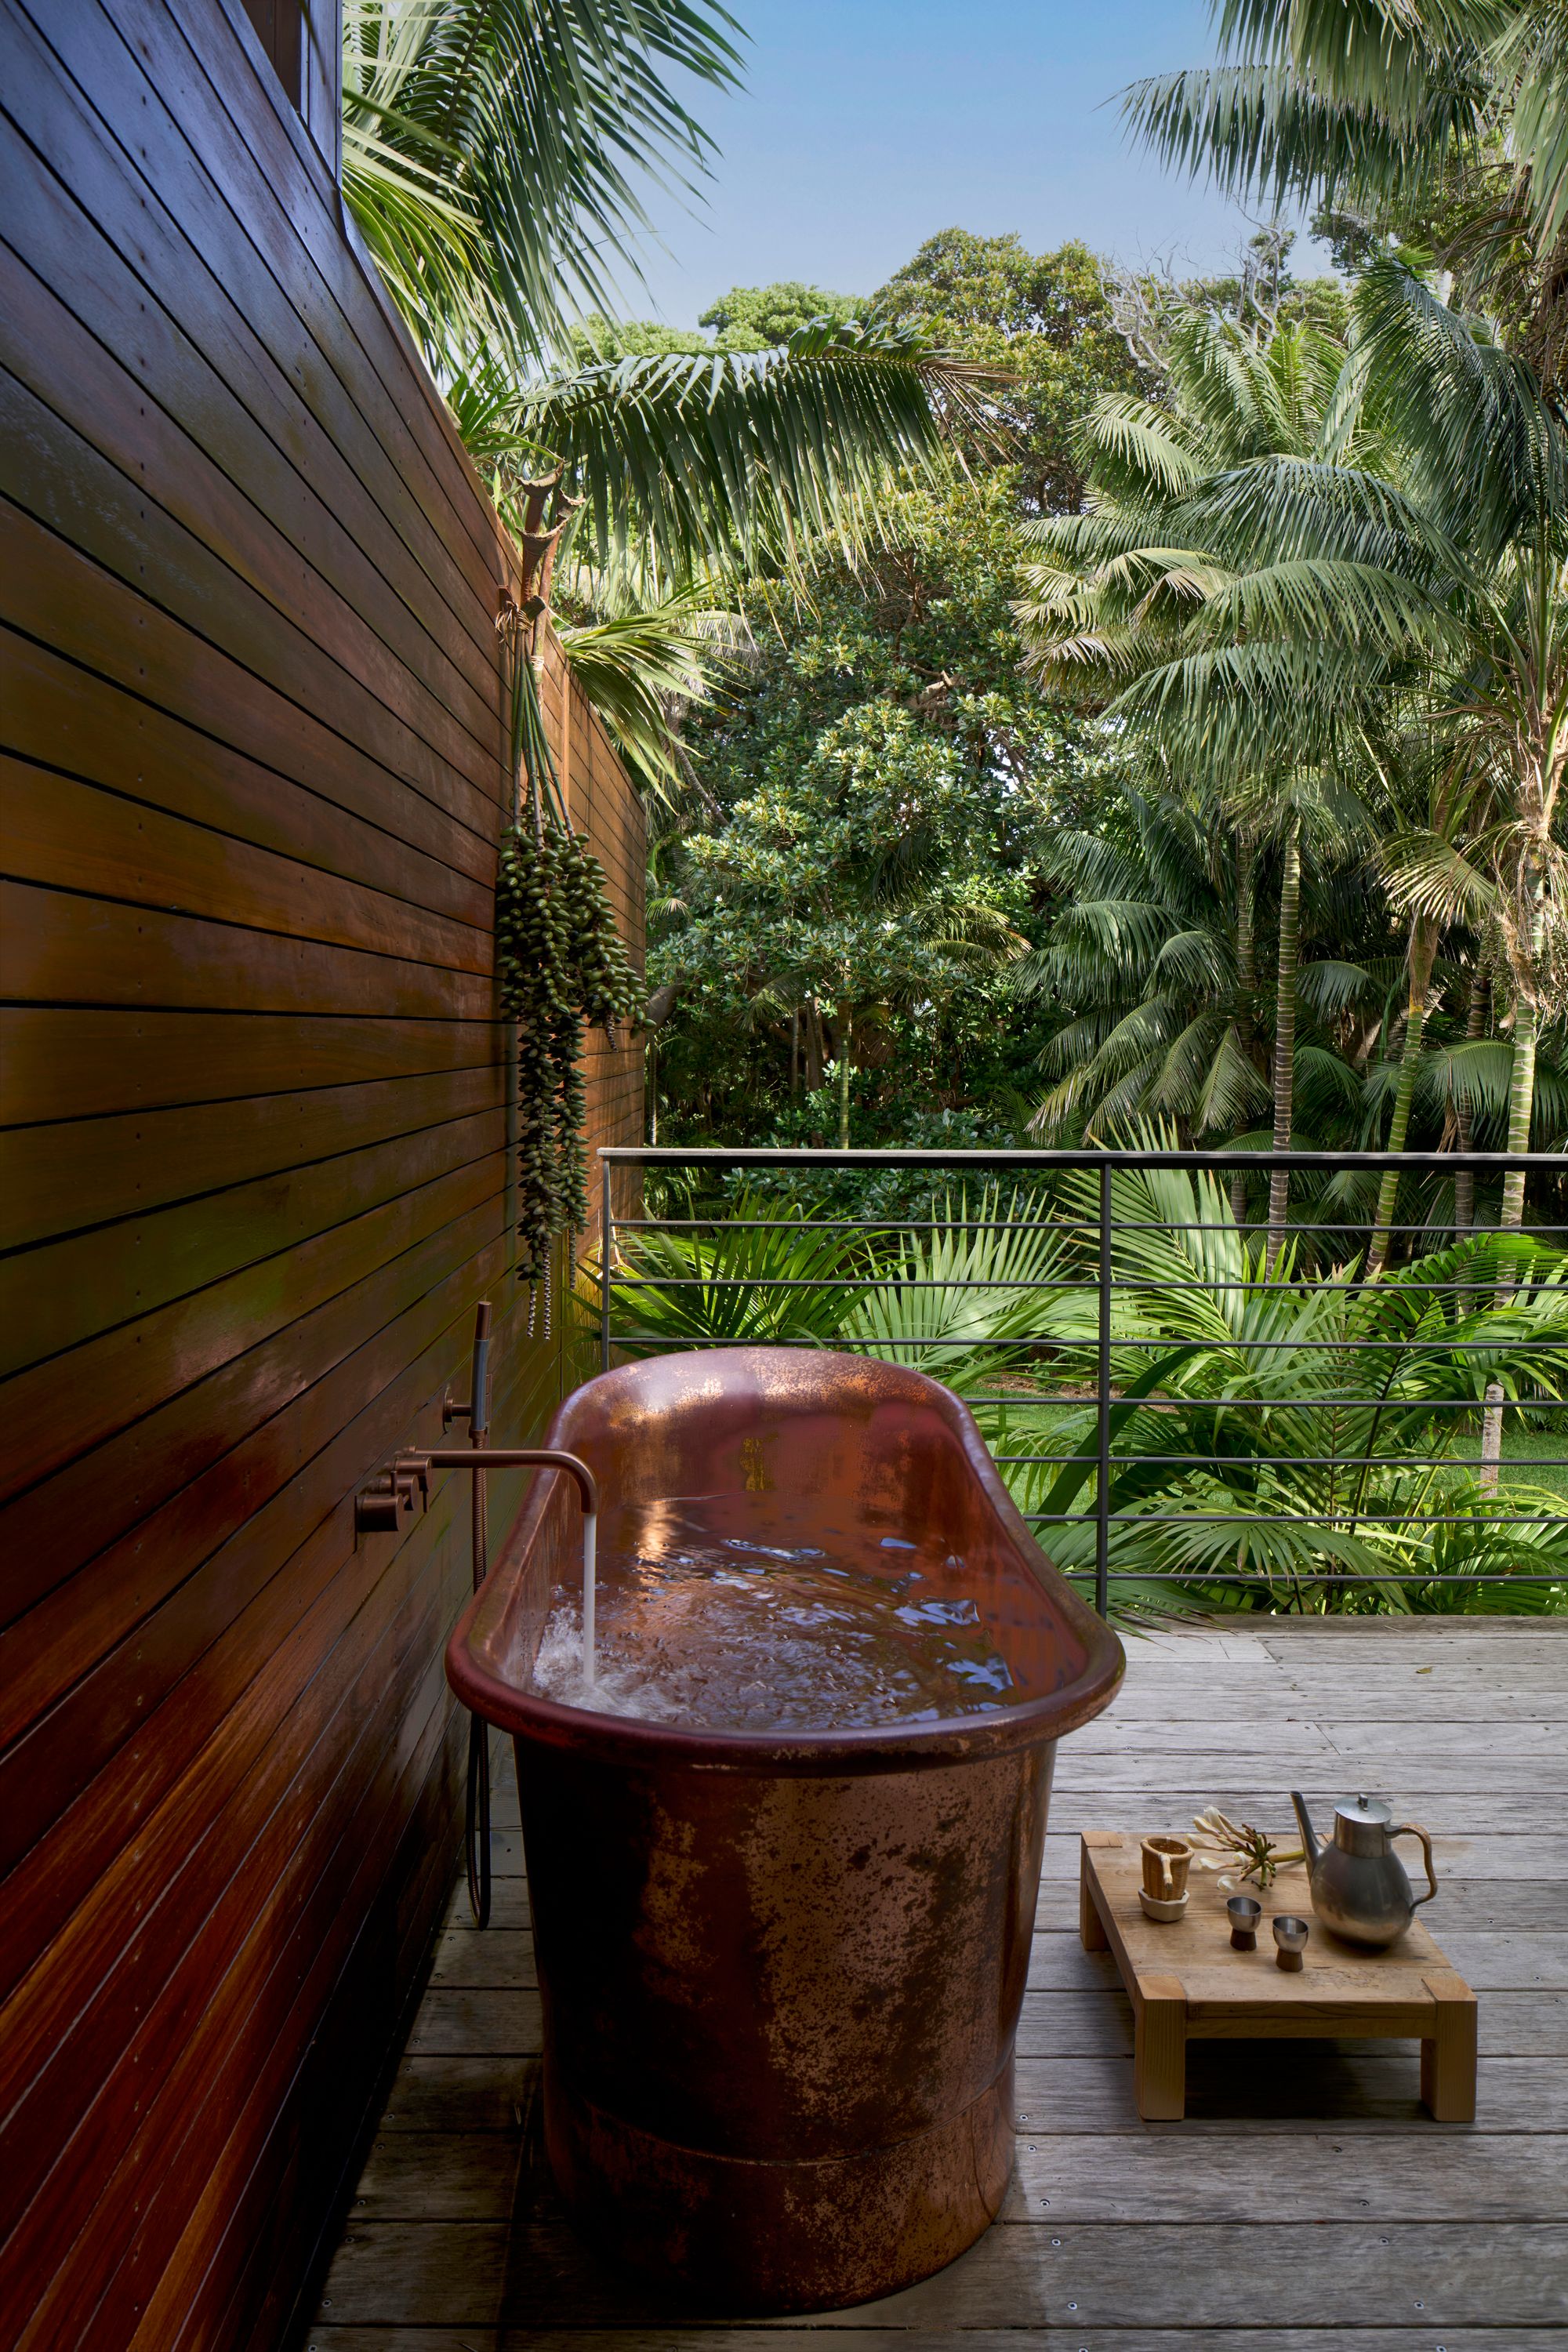 Island House, Lord Howe Island showing outdoor bath on timber deck looking out to tropical garden